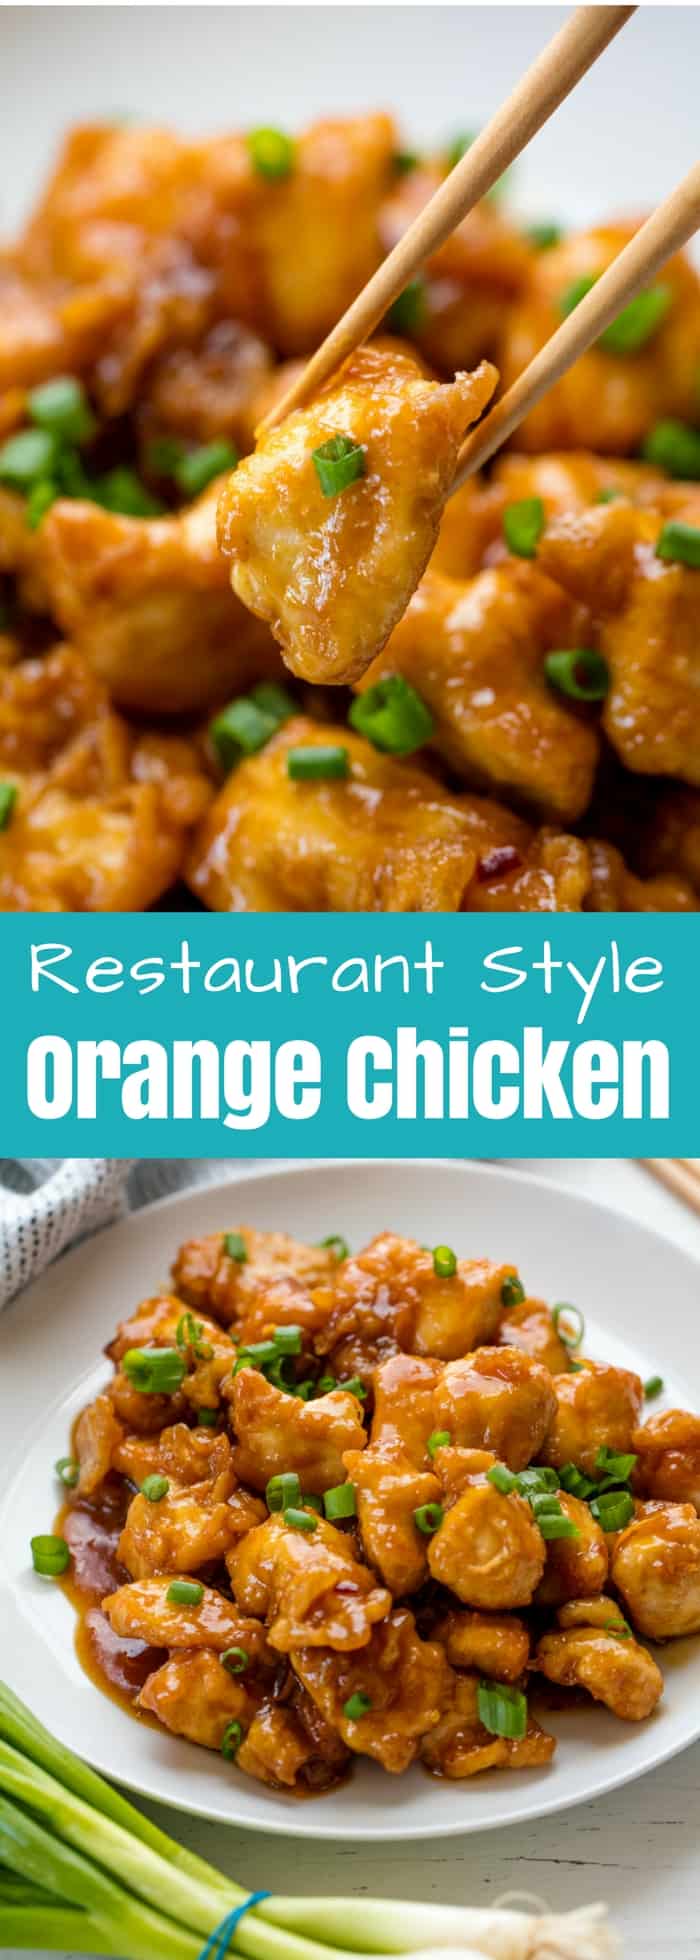 This Orange Chicken Recipe brings Chinese takeout home! It's easy to make and oh so delicious to enjoy this takeout fakeout favorite in the comfort of your own kitchen. 